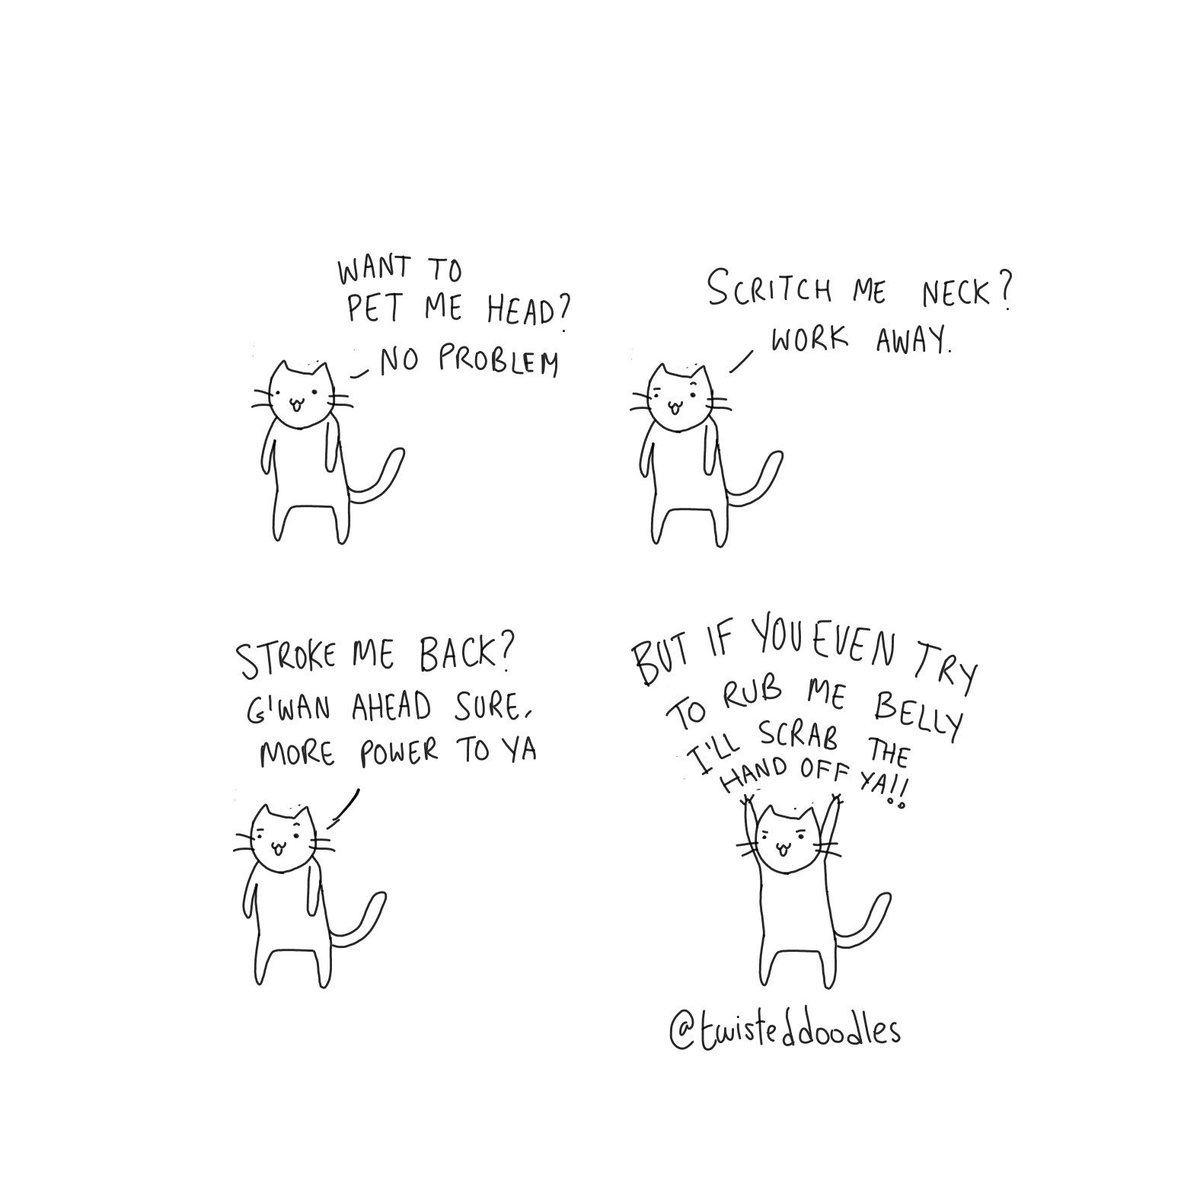 TwistedDoodles on Twitter: "The cat with an Irish accent. "